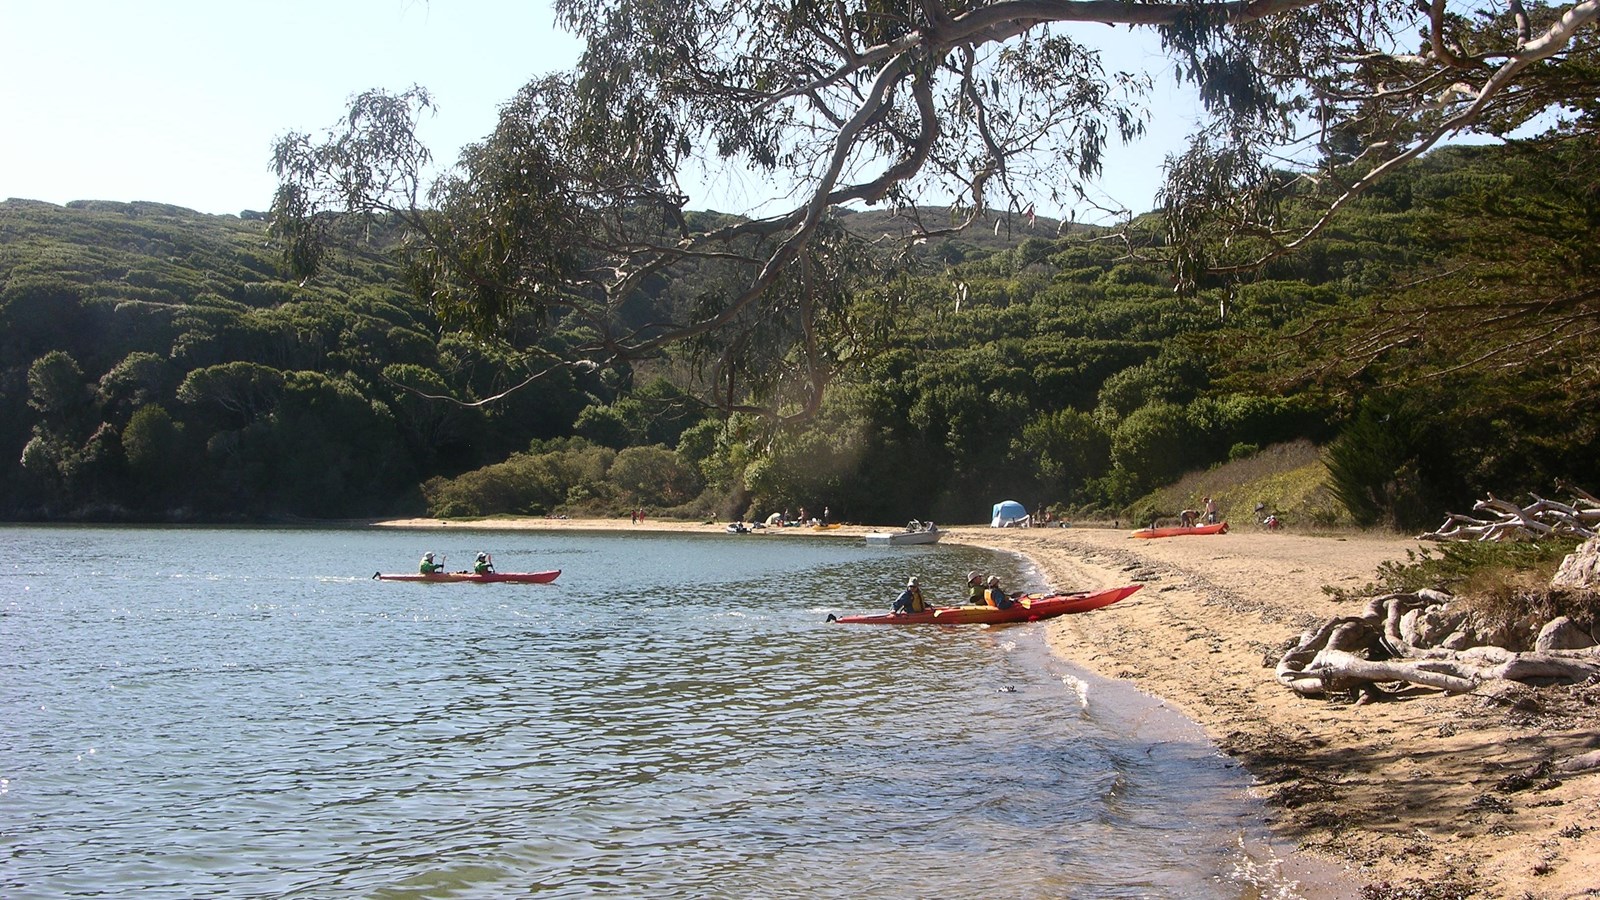 Paddlers in three kayaks land on a sandy beach. Tents and campers populate the far end of the beach.